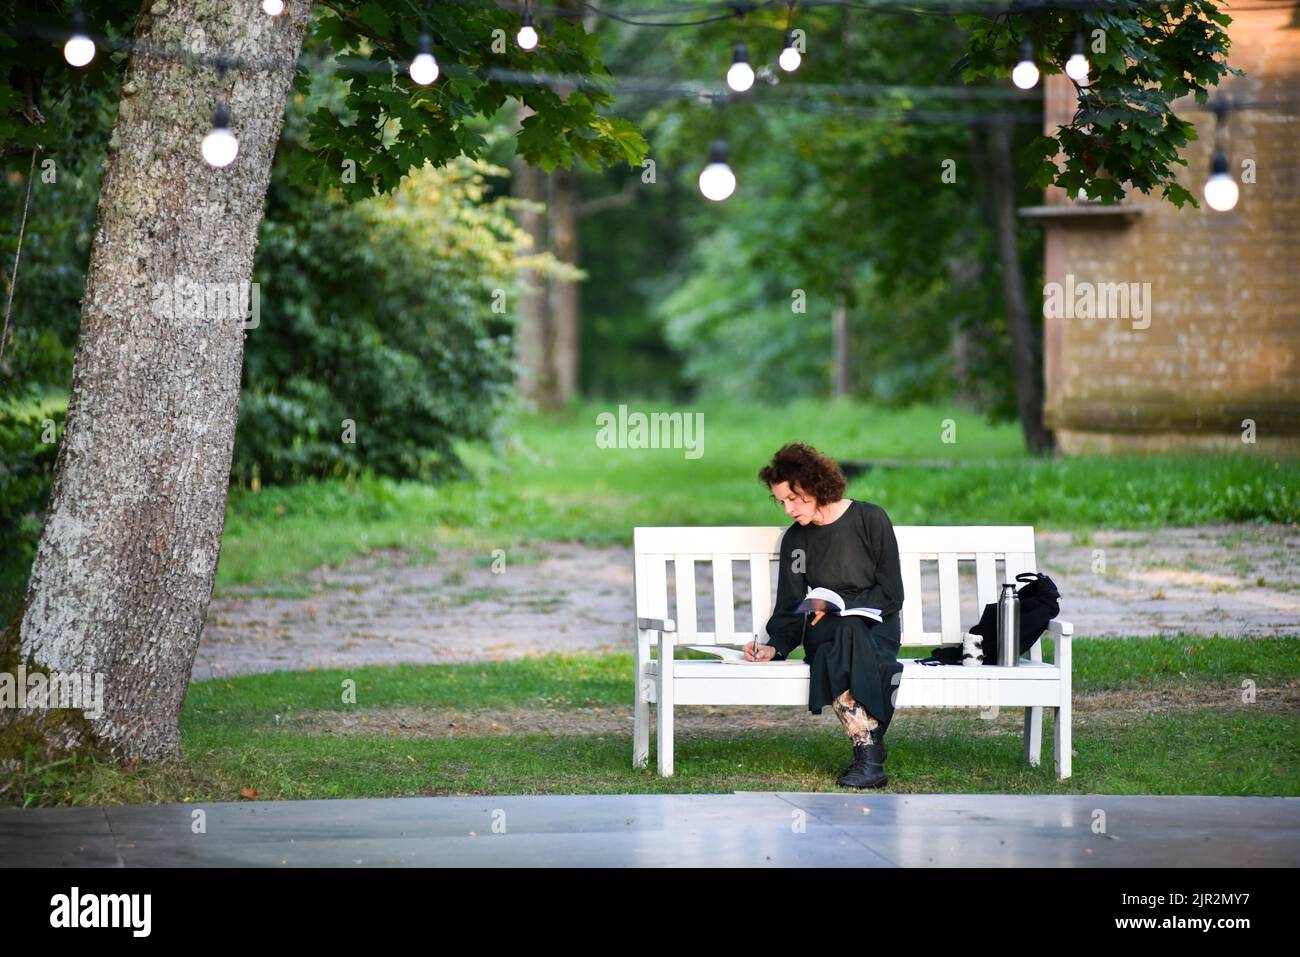 A woman sits on a park bench and reads a book. Stock Photo